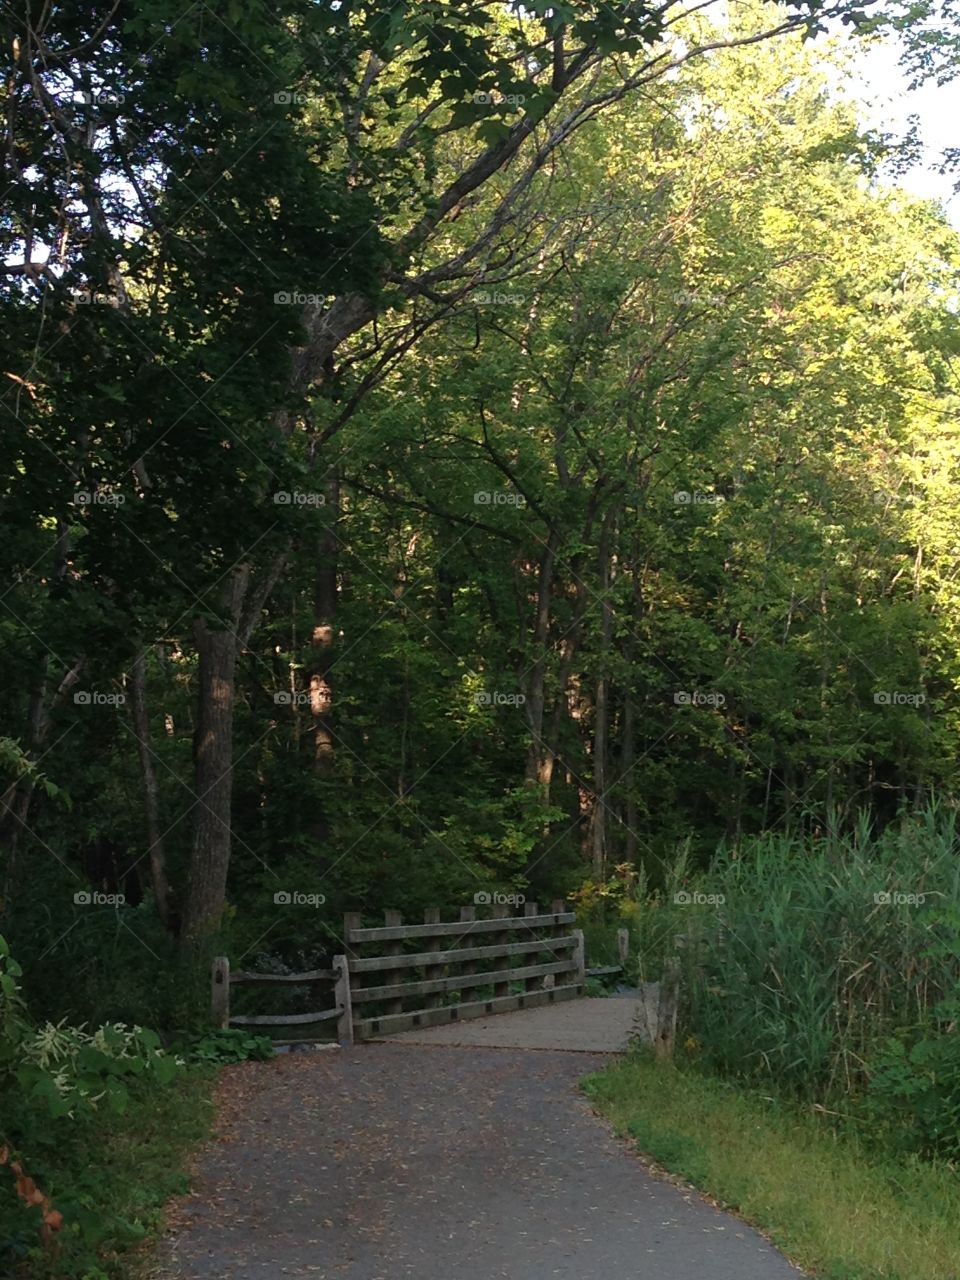 A community trail in beautiful Saratoga Springs, New York